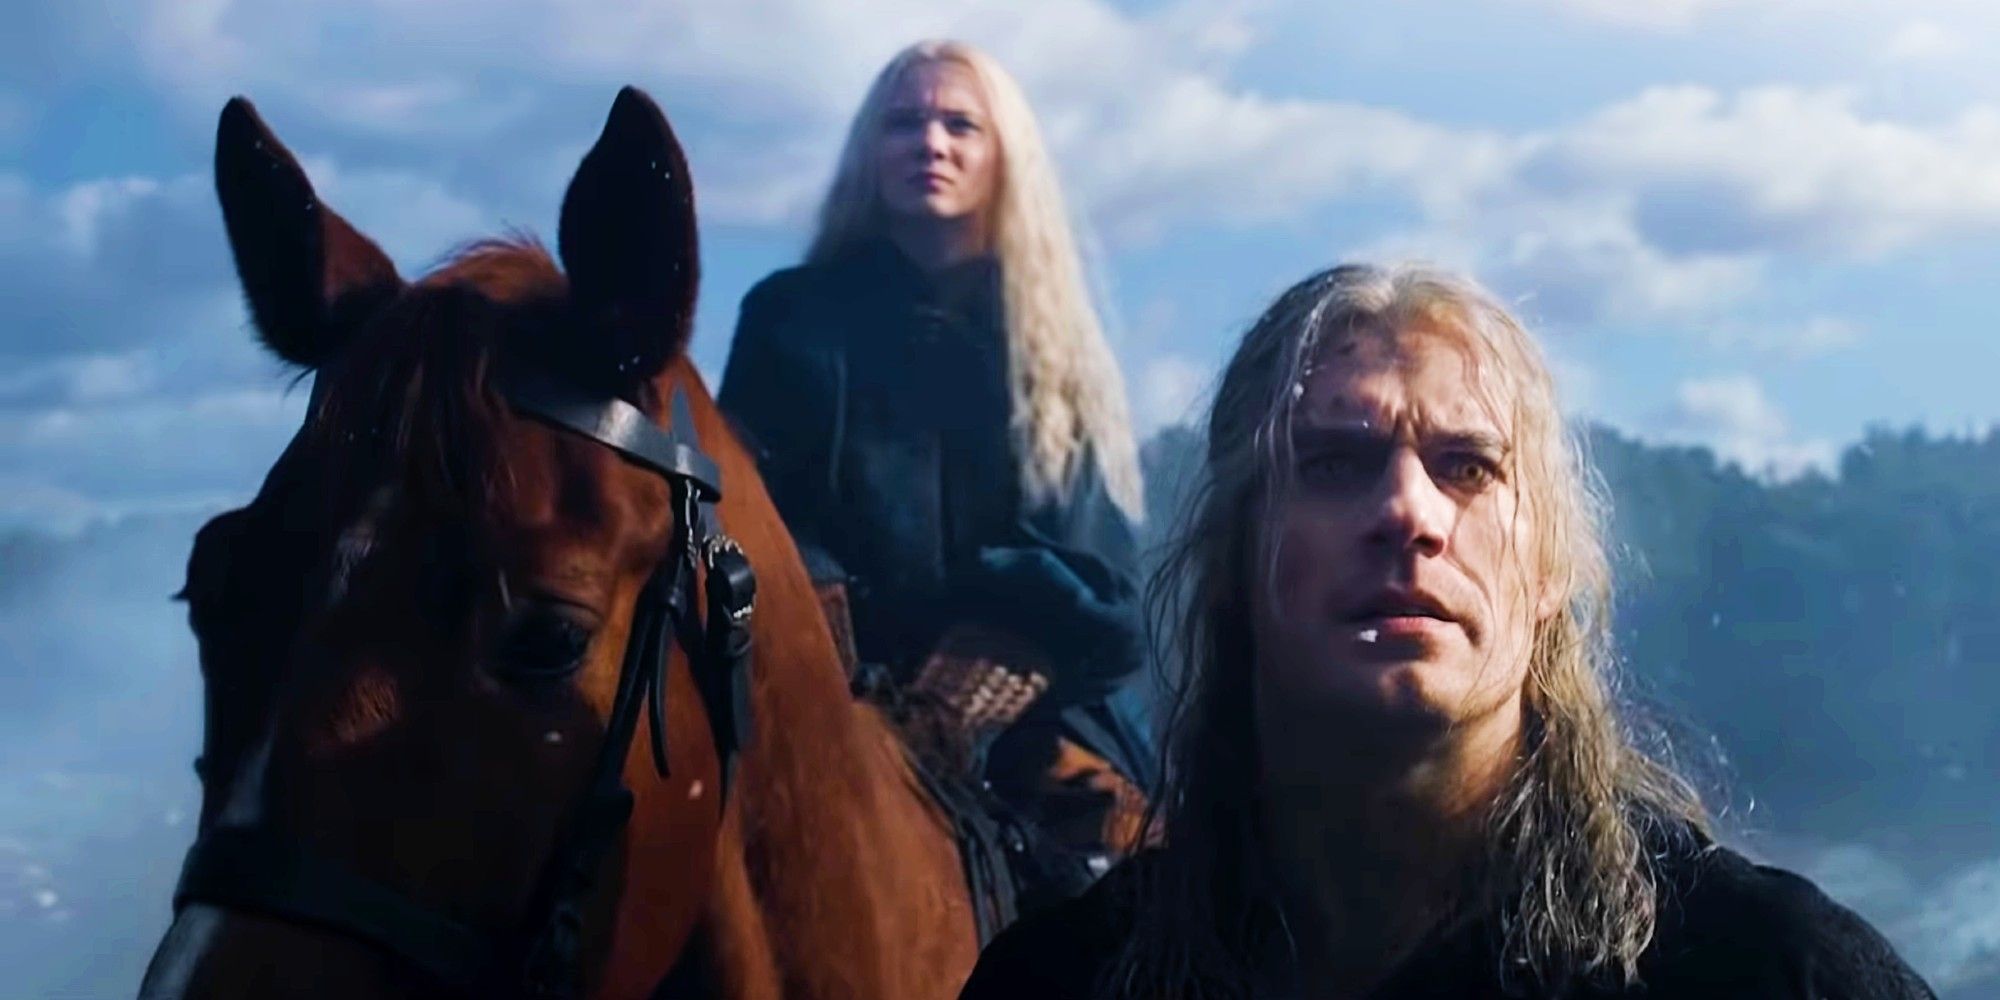 Geralt and Ciri in The Witcher Season 2 Teaser Trailer